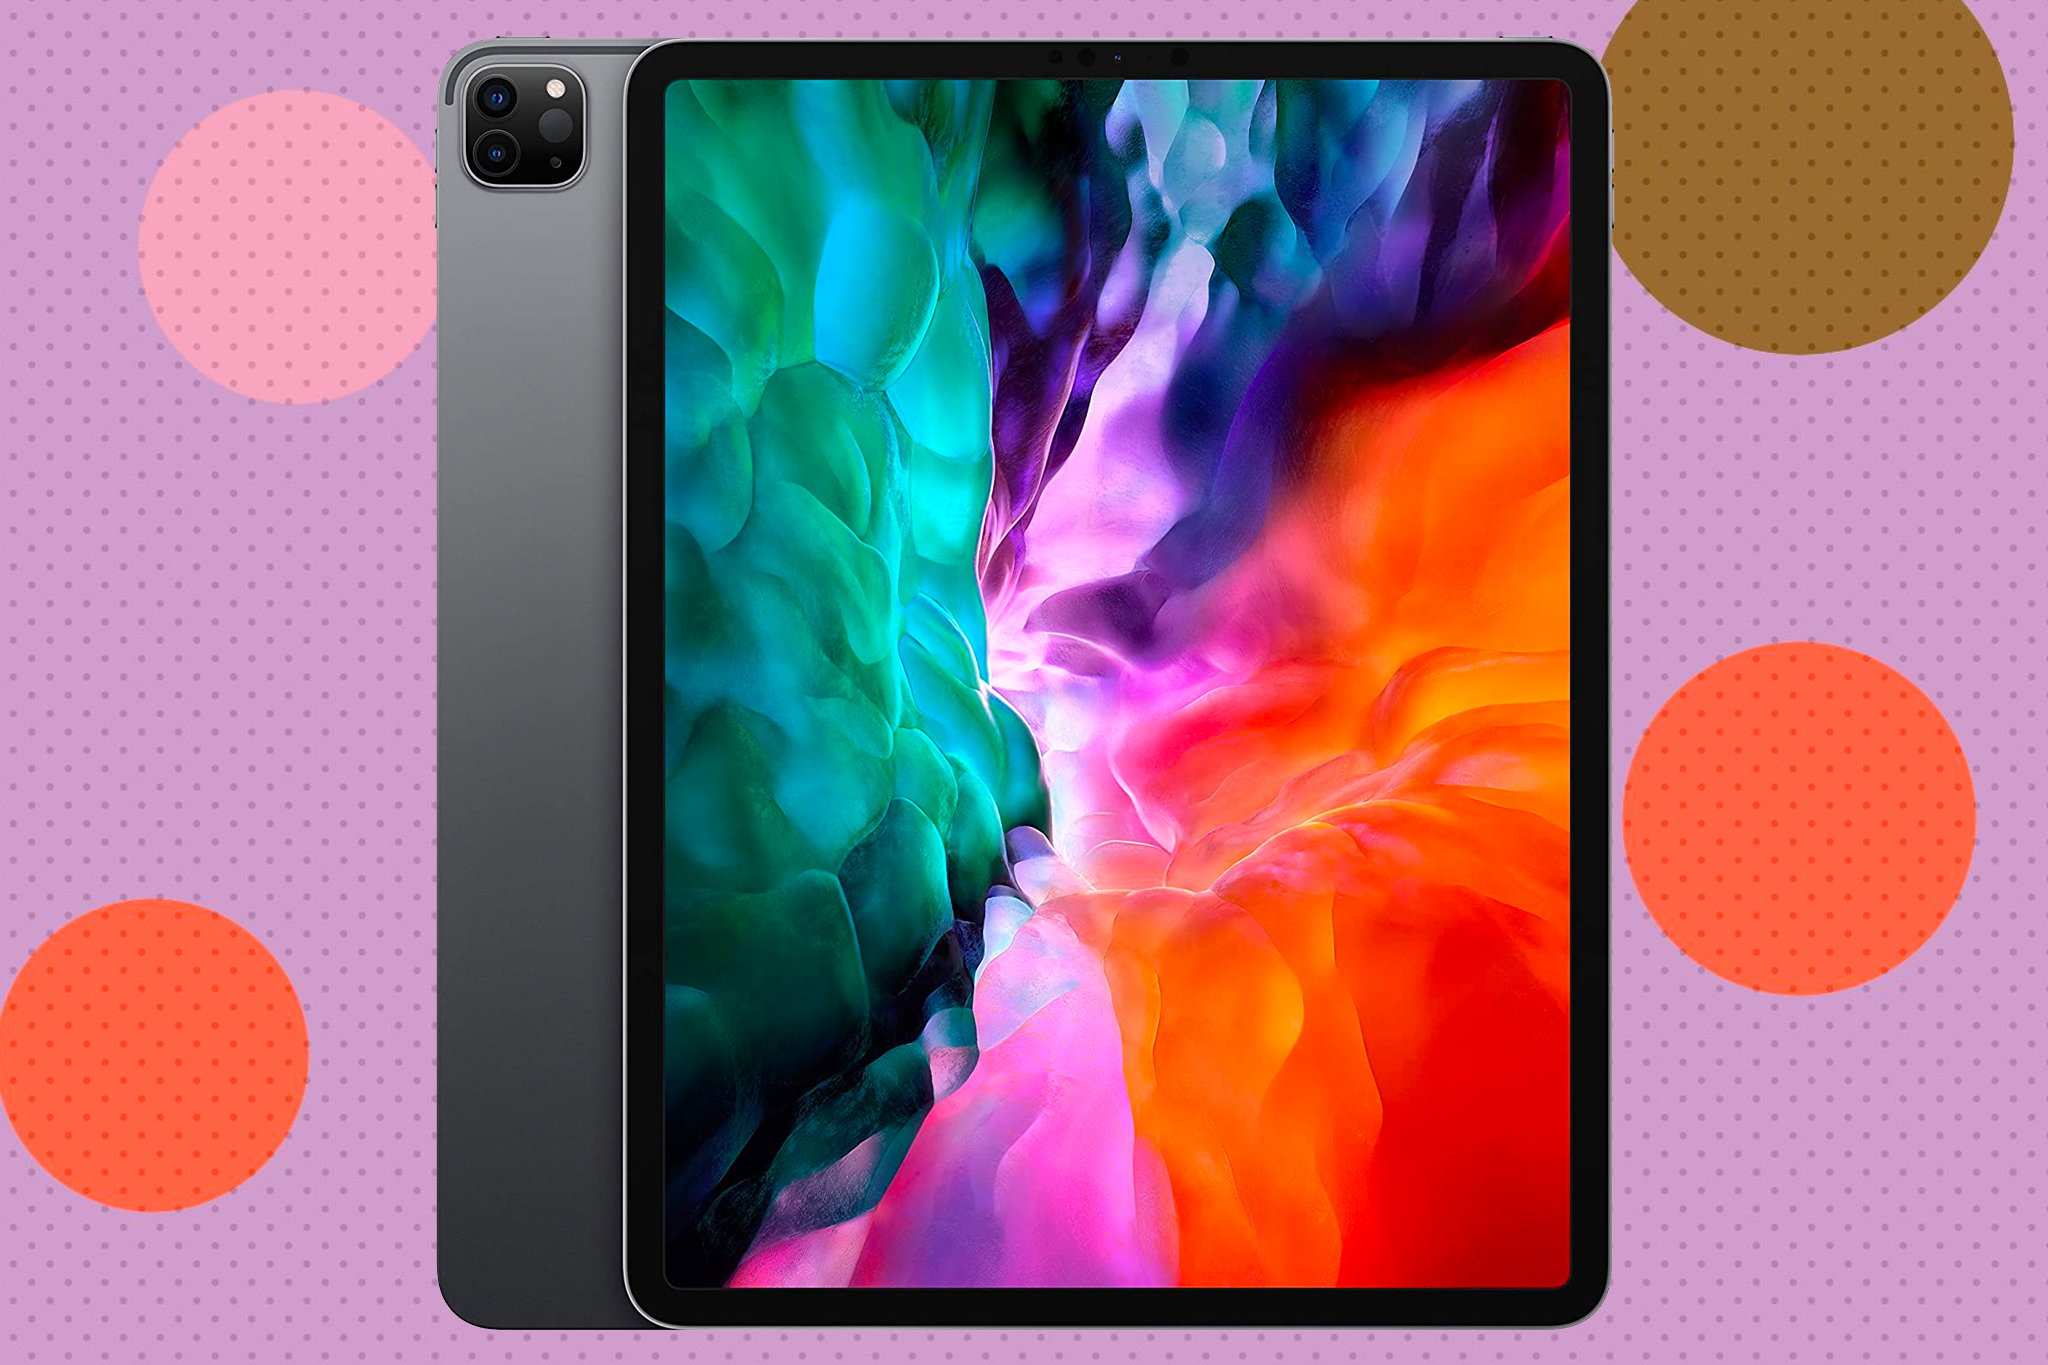 The newest, best iPad Pro is at its lowestever price